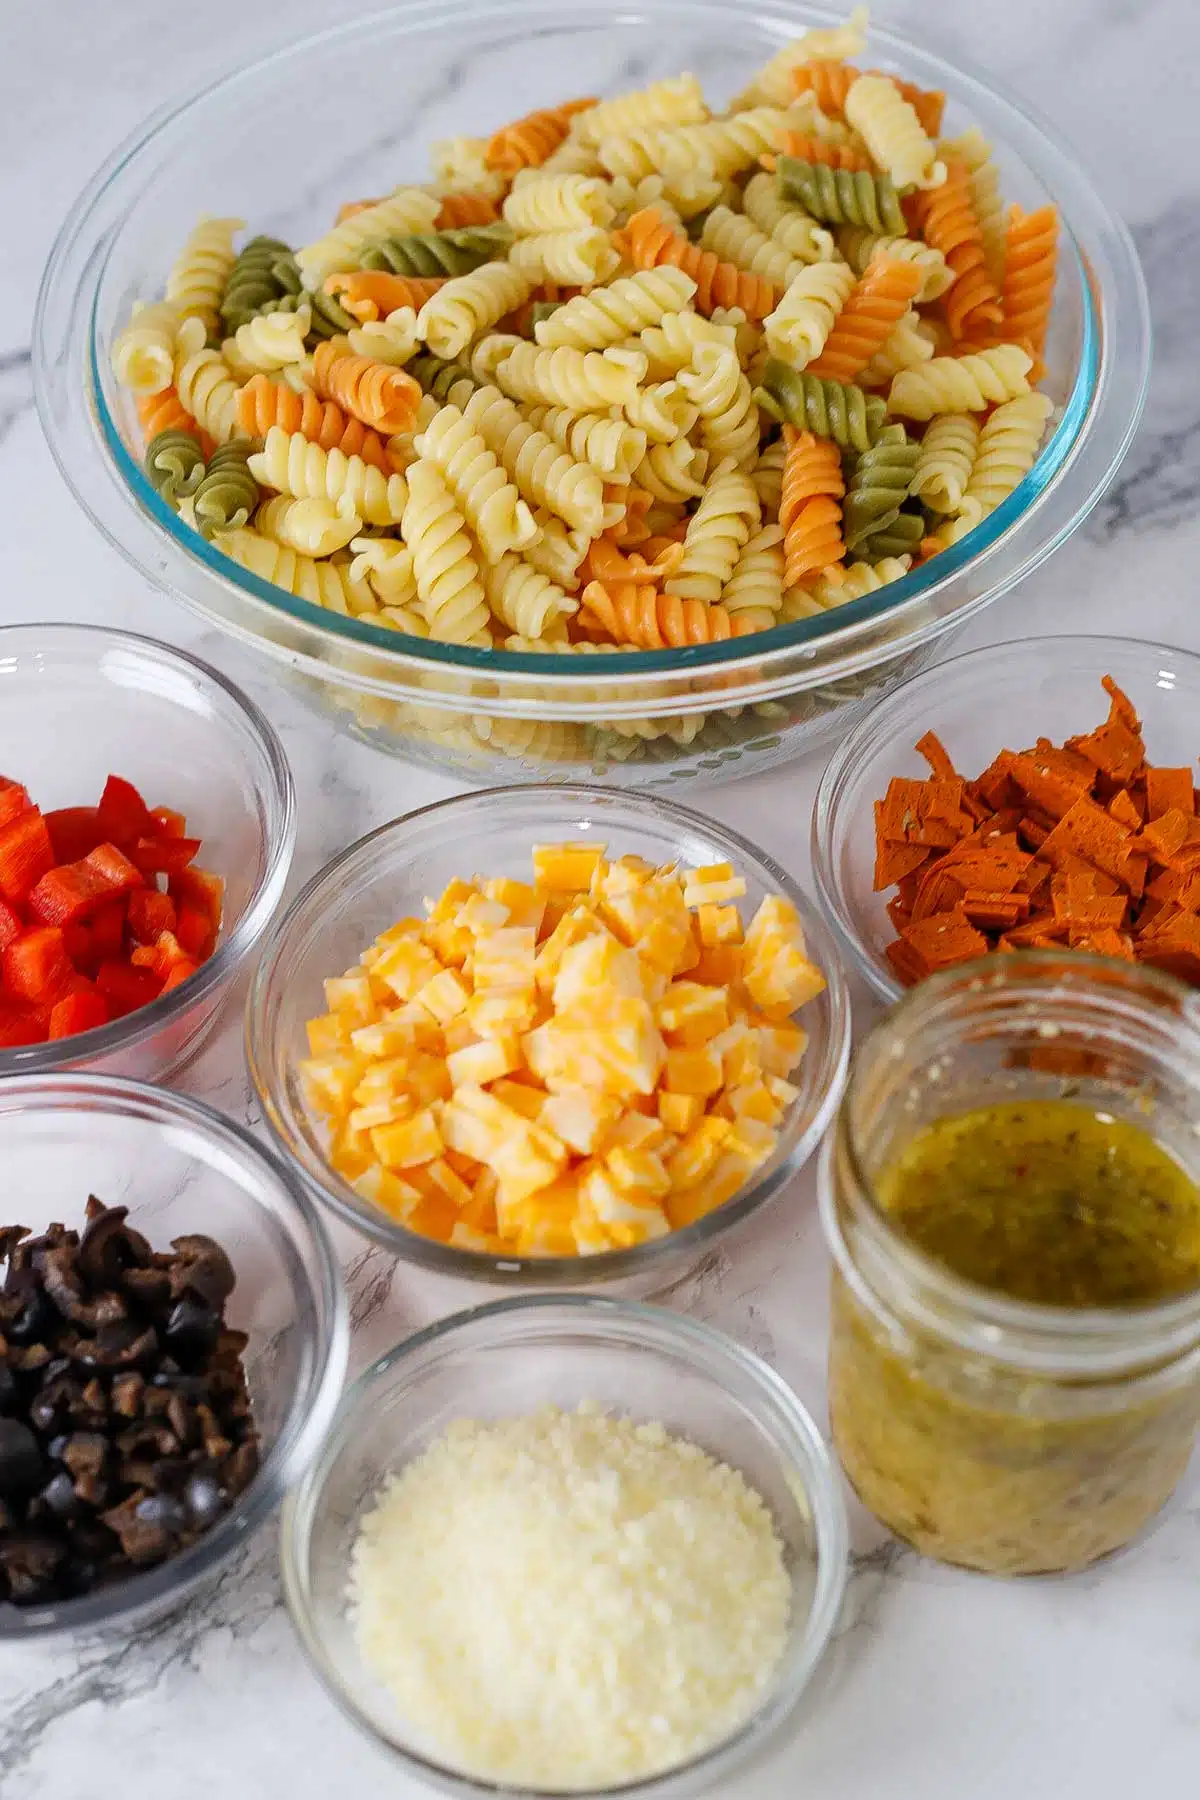 Tall image showing ingredients needed for pasta salad with Italian dressing.